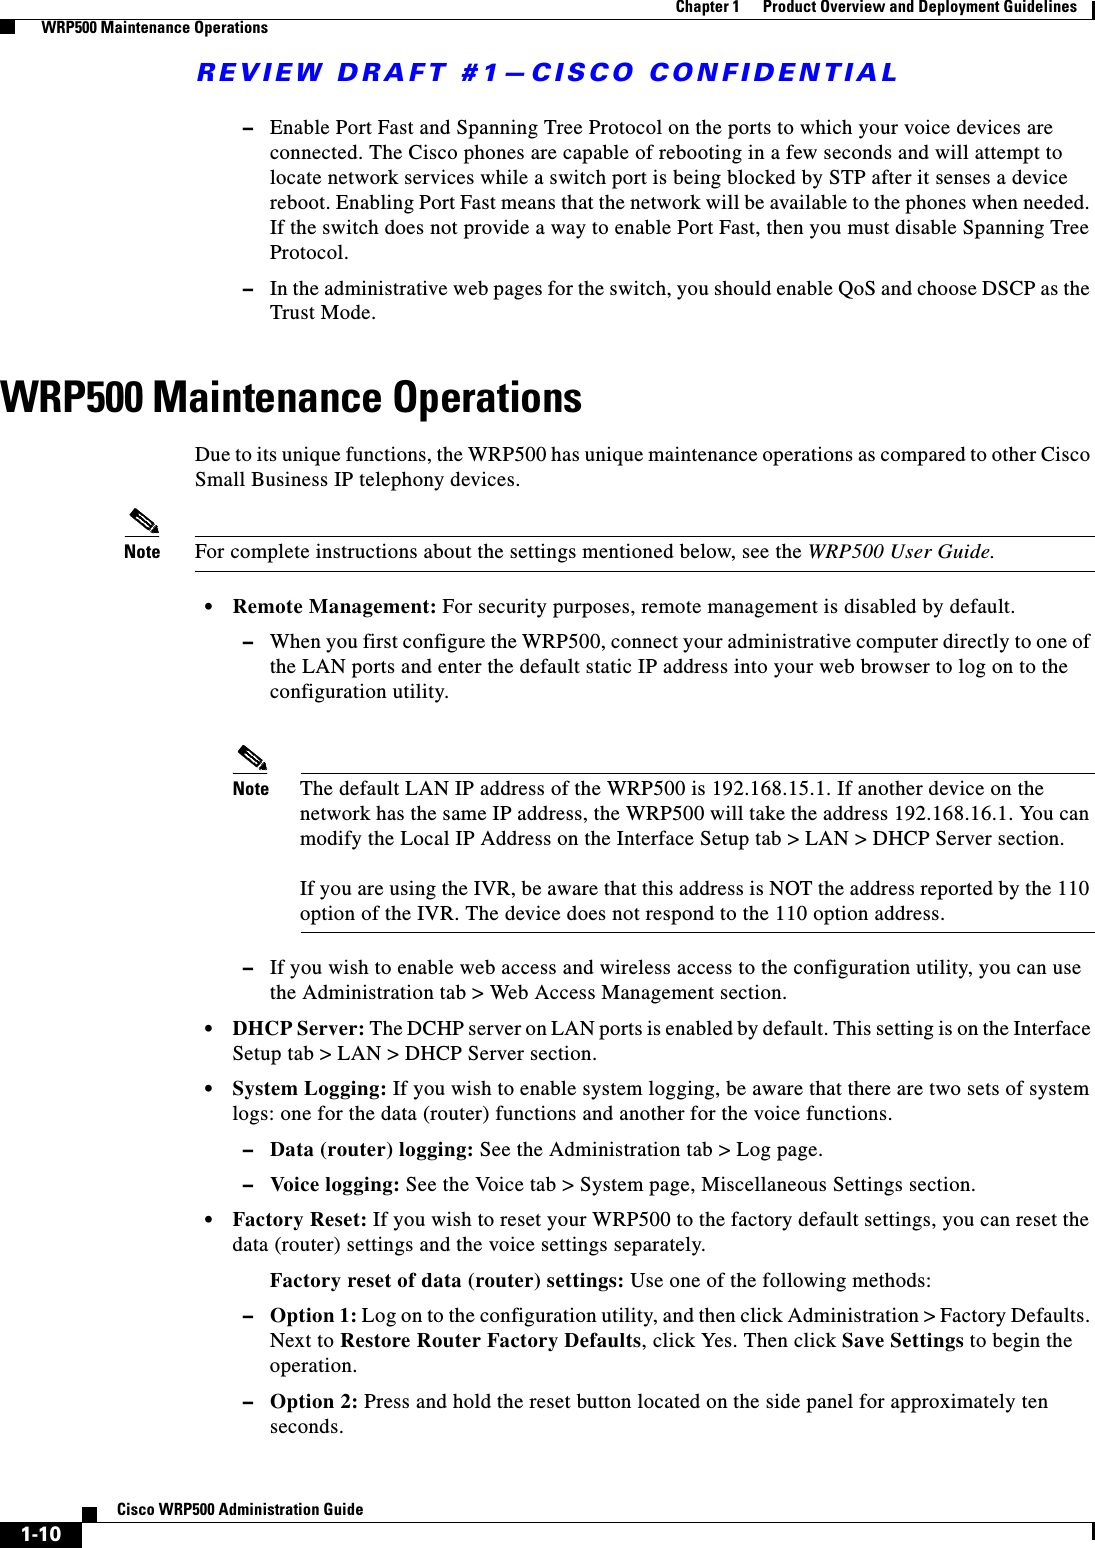 REVIEW DRAFT #1—CISCO CONFIDENTIAL1-10Cisco WRP500 Administration Guide Chapter 1      Product Overview and Deployment Guidelines  WRP500 Maintenance Operations–Enable Port Fast and Spanning Tree Protocol on the ports to which your voice devices are connected. The Cisco phones are capable of rebooting in a few seconds and will attempt to locate network services while a switch port is being blocked by STP after it senses a device reboot. Enabling Port Fast means that the network will be available to the phones when needed. If the switch does not provide a way to enable Port Fast, then you must disable Spanning Tree Protocol. –In the administrative web pages for the switch, you should enable QoS and choose DSCP as the Trust Mode.WRP500 Maintenance OperationsDue to its unique functions, the WRP500 has unique maintenance operations as compared to other Cisco Small Business IP telephony devices.Note For complete instructions about the settings mentioned below, see the WRP500 User Guide.•Remote Management: For security purposes, remote management is disabled by default. –When you first configure the WRP500, connect your administrative computer directly to one of the LAN ports and enter the default static IP address into your web browser to log on to the configuration utility. Note The default LAN IP address of the WRP500 is 192.168.15.1. If another device on the network has the same IP address, the WRP500 will take the address 192.168.16.1. You can modify the Local IP Address on the Interface Setup tab &gt; LAN &gt; DHCP Server section.If you are using the IVR, be aware that this address is NOT the address reported by the 110 option of the IVR. The device does not respond to the 110 option address.–If you wish to enable web access and wireless access to the configuration utility, you can use the Administration tab &gt; Web Access Management section.•DHCP Server: The DCHP server on LAN ports is enabled by default. This setting is on the Interface Setup tab &gt; LAN &gt; DHCP Server section.•System Logging: If you wish to enable system logging, be aware that there are two sets of system logs: one for the data (router) functions and another for the voice functions. –Data (router) logging: See the Administration tab &gt; Log page. –Voice logging: See the Voice tab &gt; System page, Miscellaneous Settings section.•Factory Reset: If you wish to reset your WRP500 to the factory default settings, you can reset the data (router) settings and the voice settings separately. Factory reset of data (router) settings: Use one of the following methods:–Option 1: Log on to the configuration utility, and then click Administration &gt; Factory Defaults. Next to Restore Router Factory Defaults, click Yes. Then click Save Settings to begin the operation.–Option 2: Press and hold the reset button located on the side panel for approximately ten seconds.